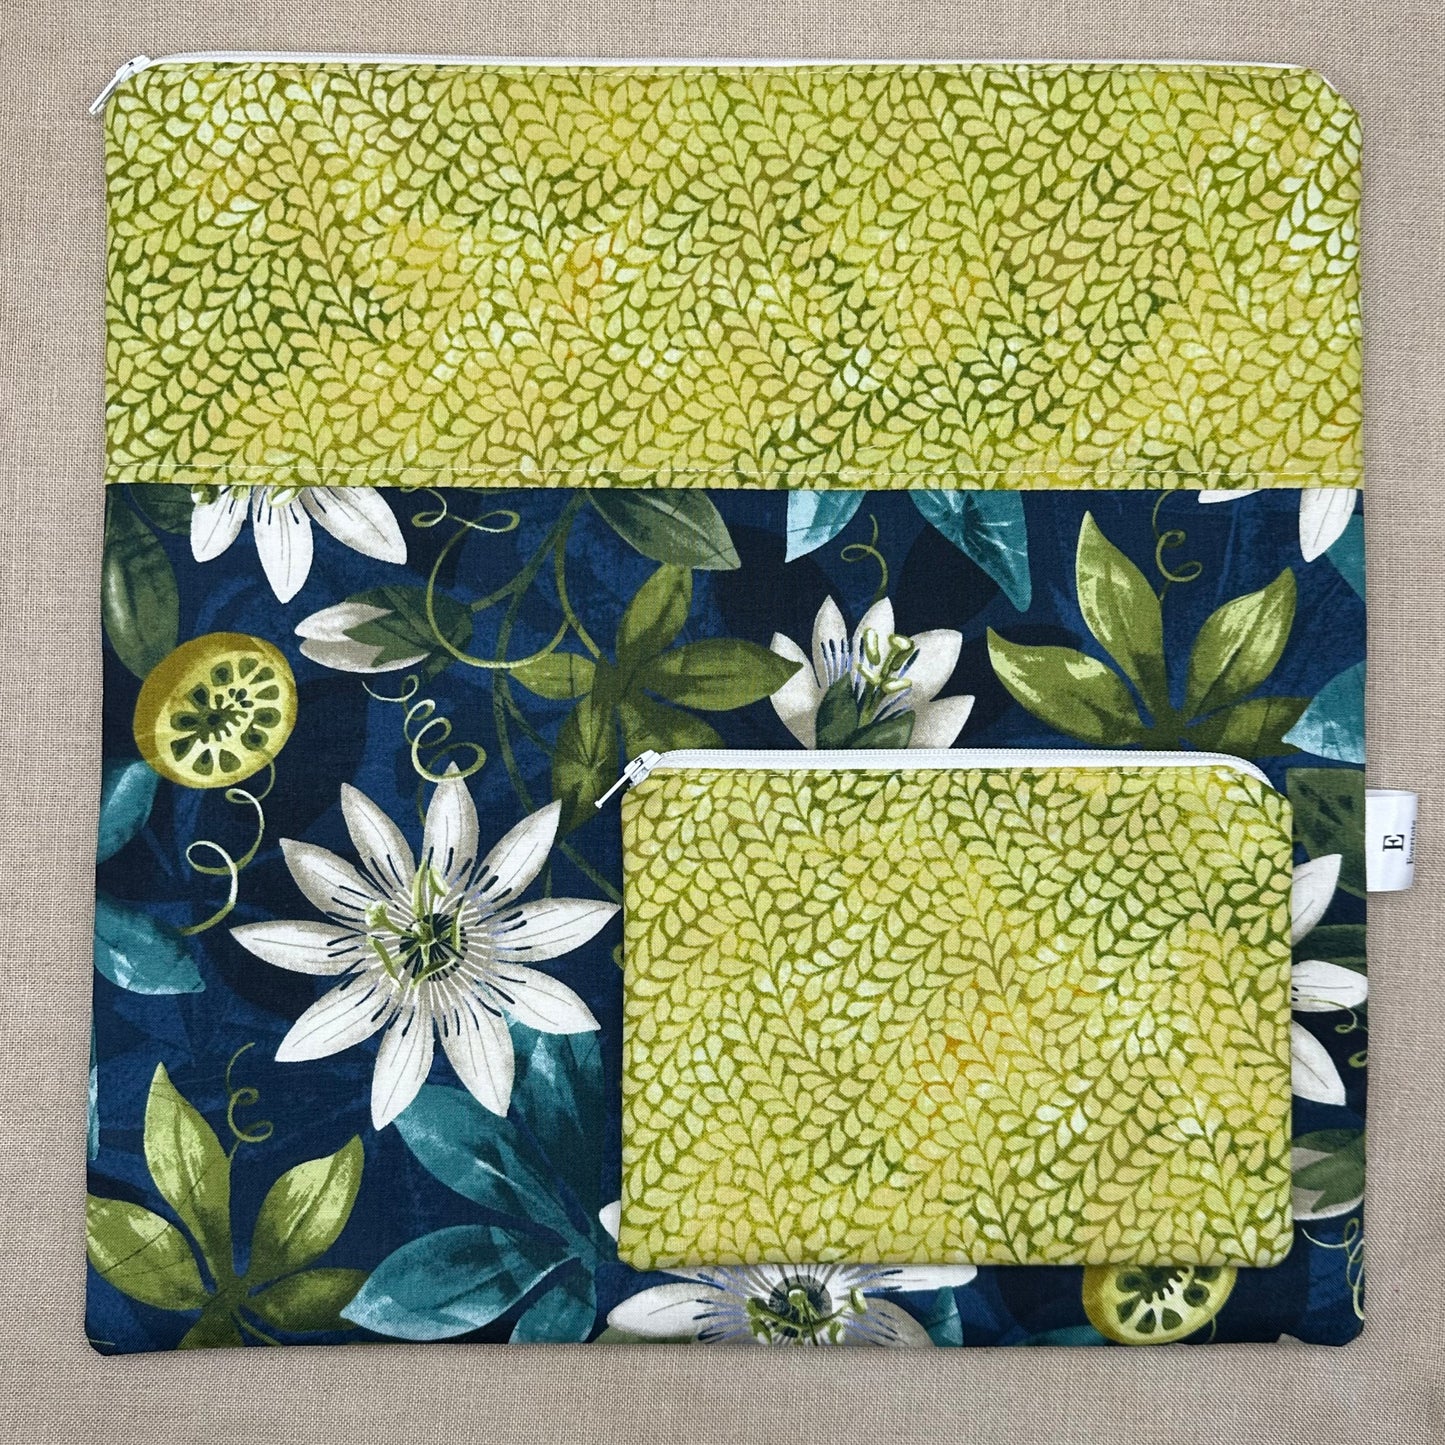 Summer Garden - Project Bag with Coordinating Notions Pouch